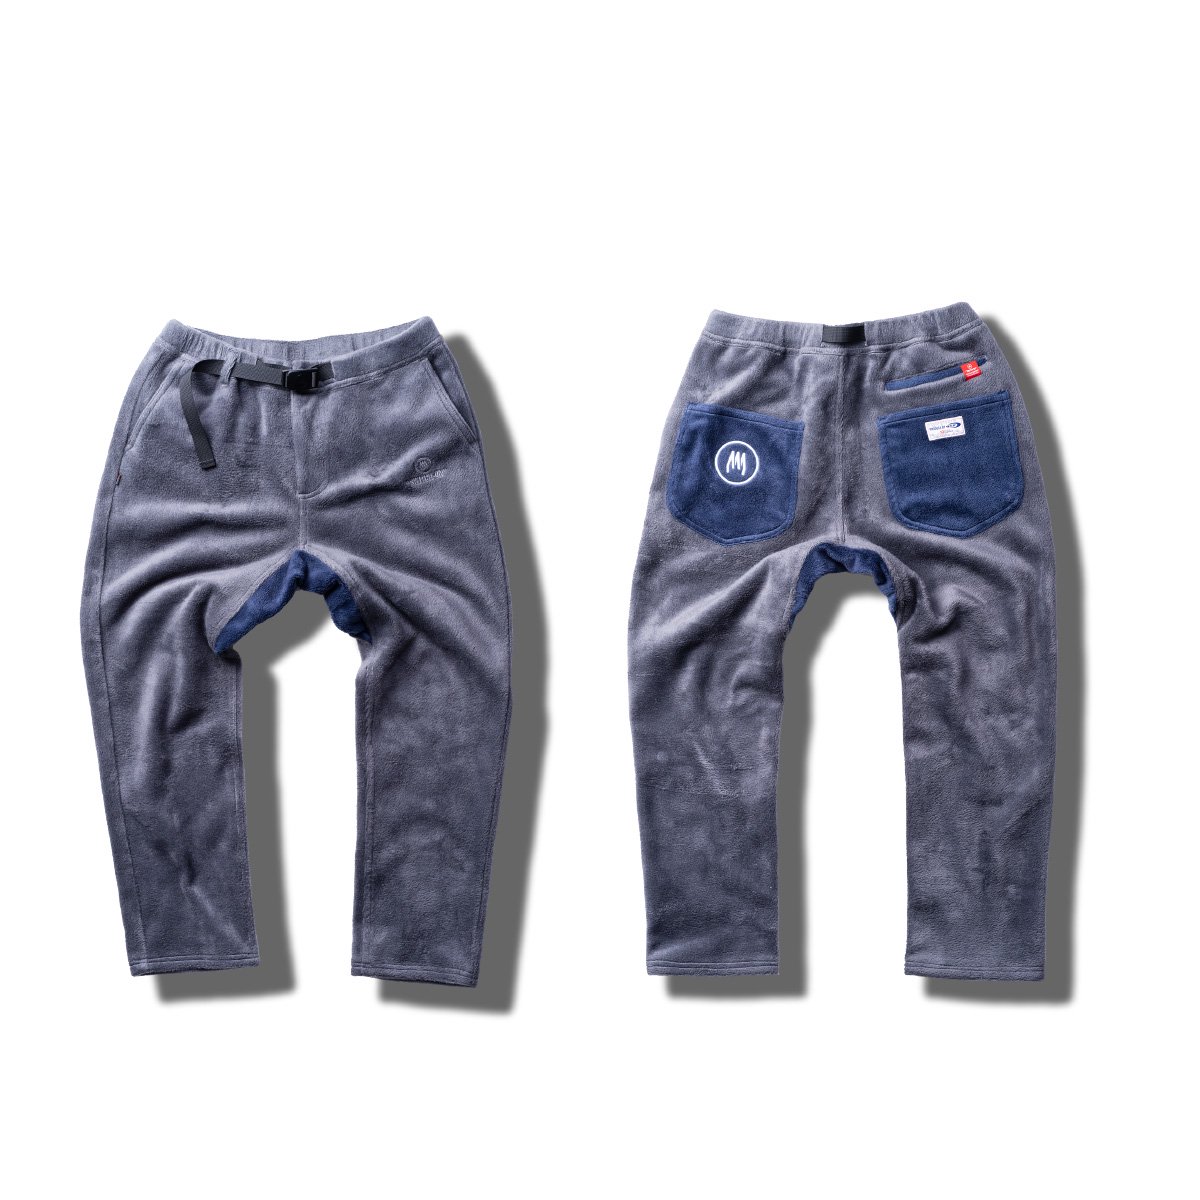 <img class='new_mark_img1' src='https://img.shop-pro.jp/img/new/icons47.gif' style='border:none;display:inline;margin:0px;padding:0px;width:auto;' />3A Brushed pants